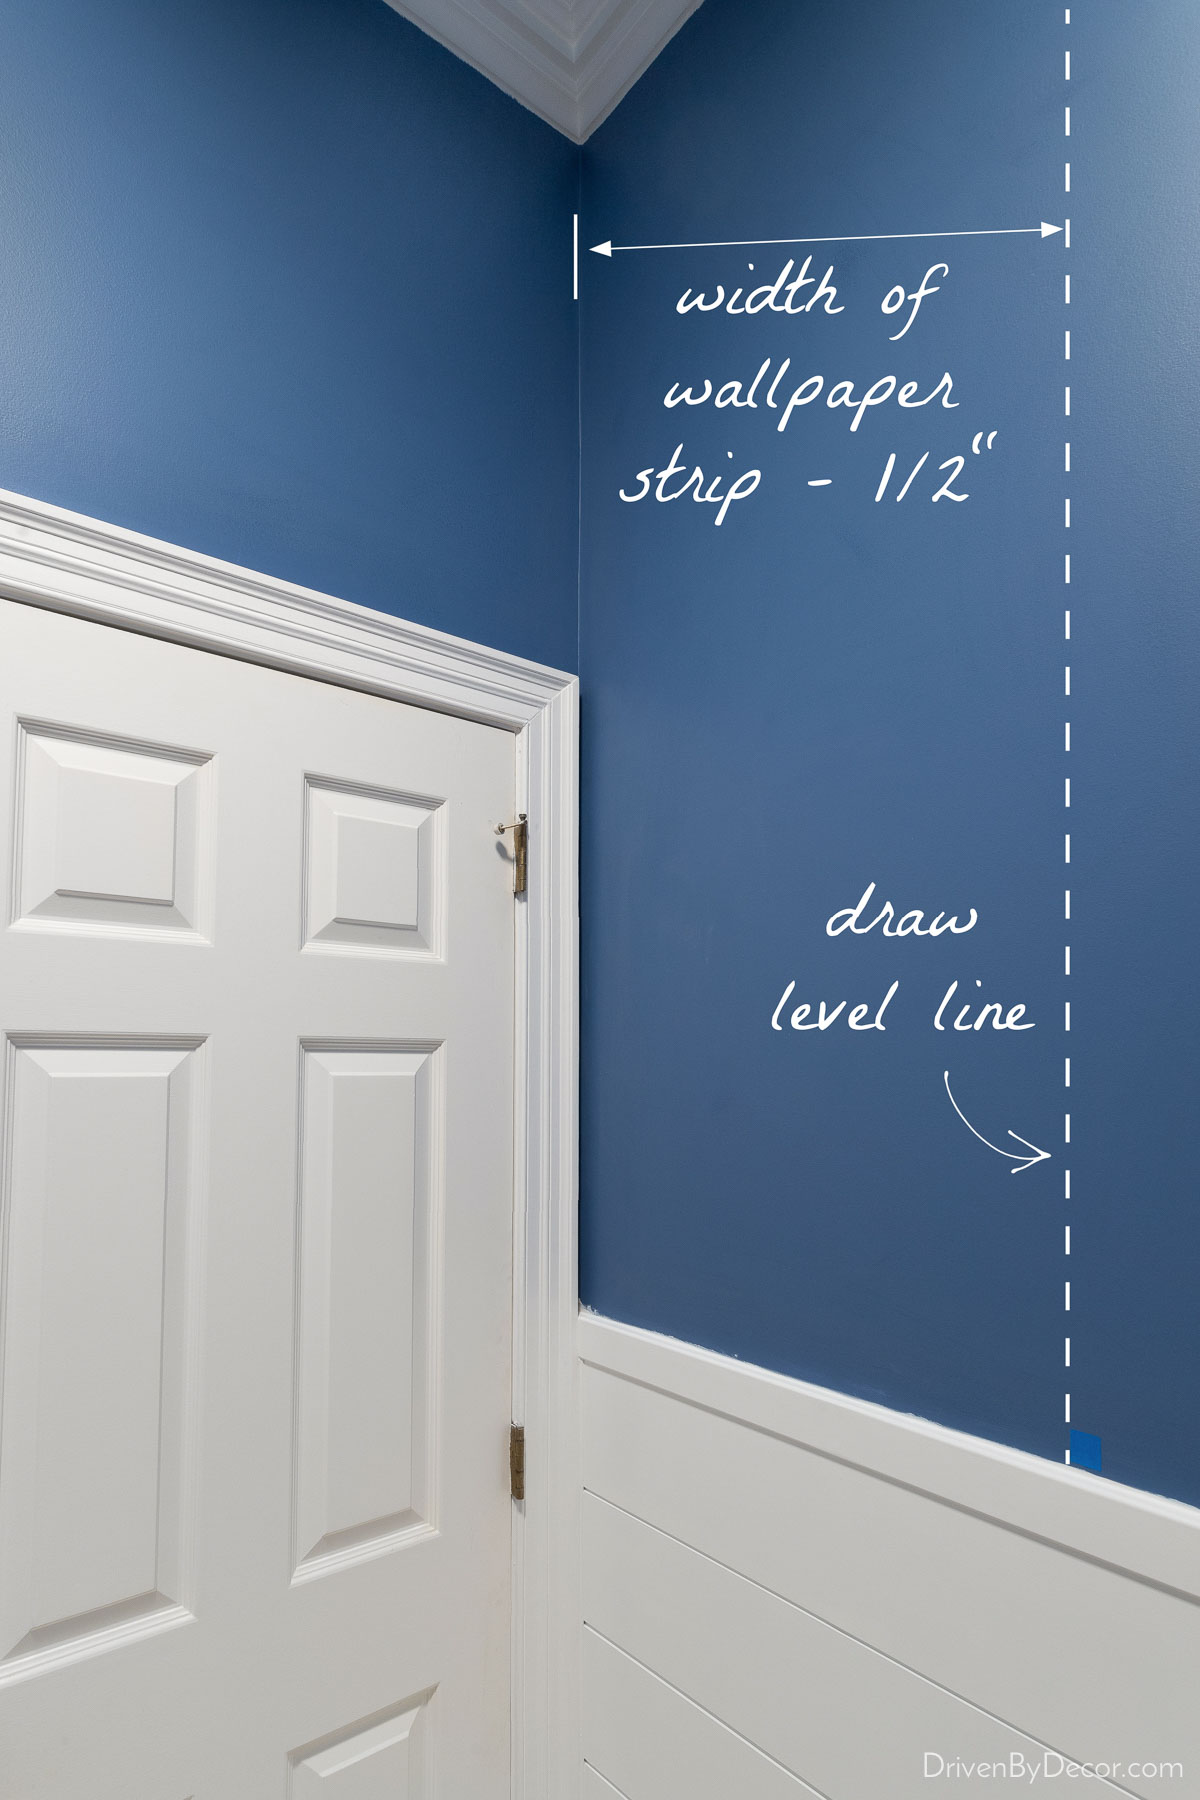 Draw a level line before installation of your first wallpaper strip